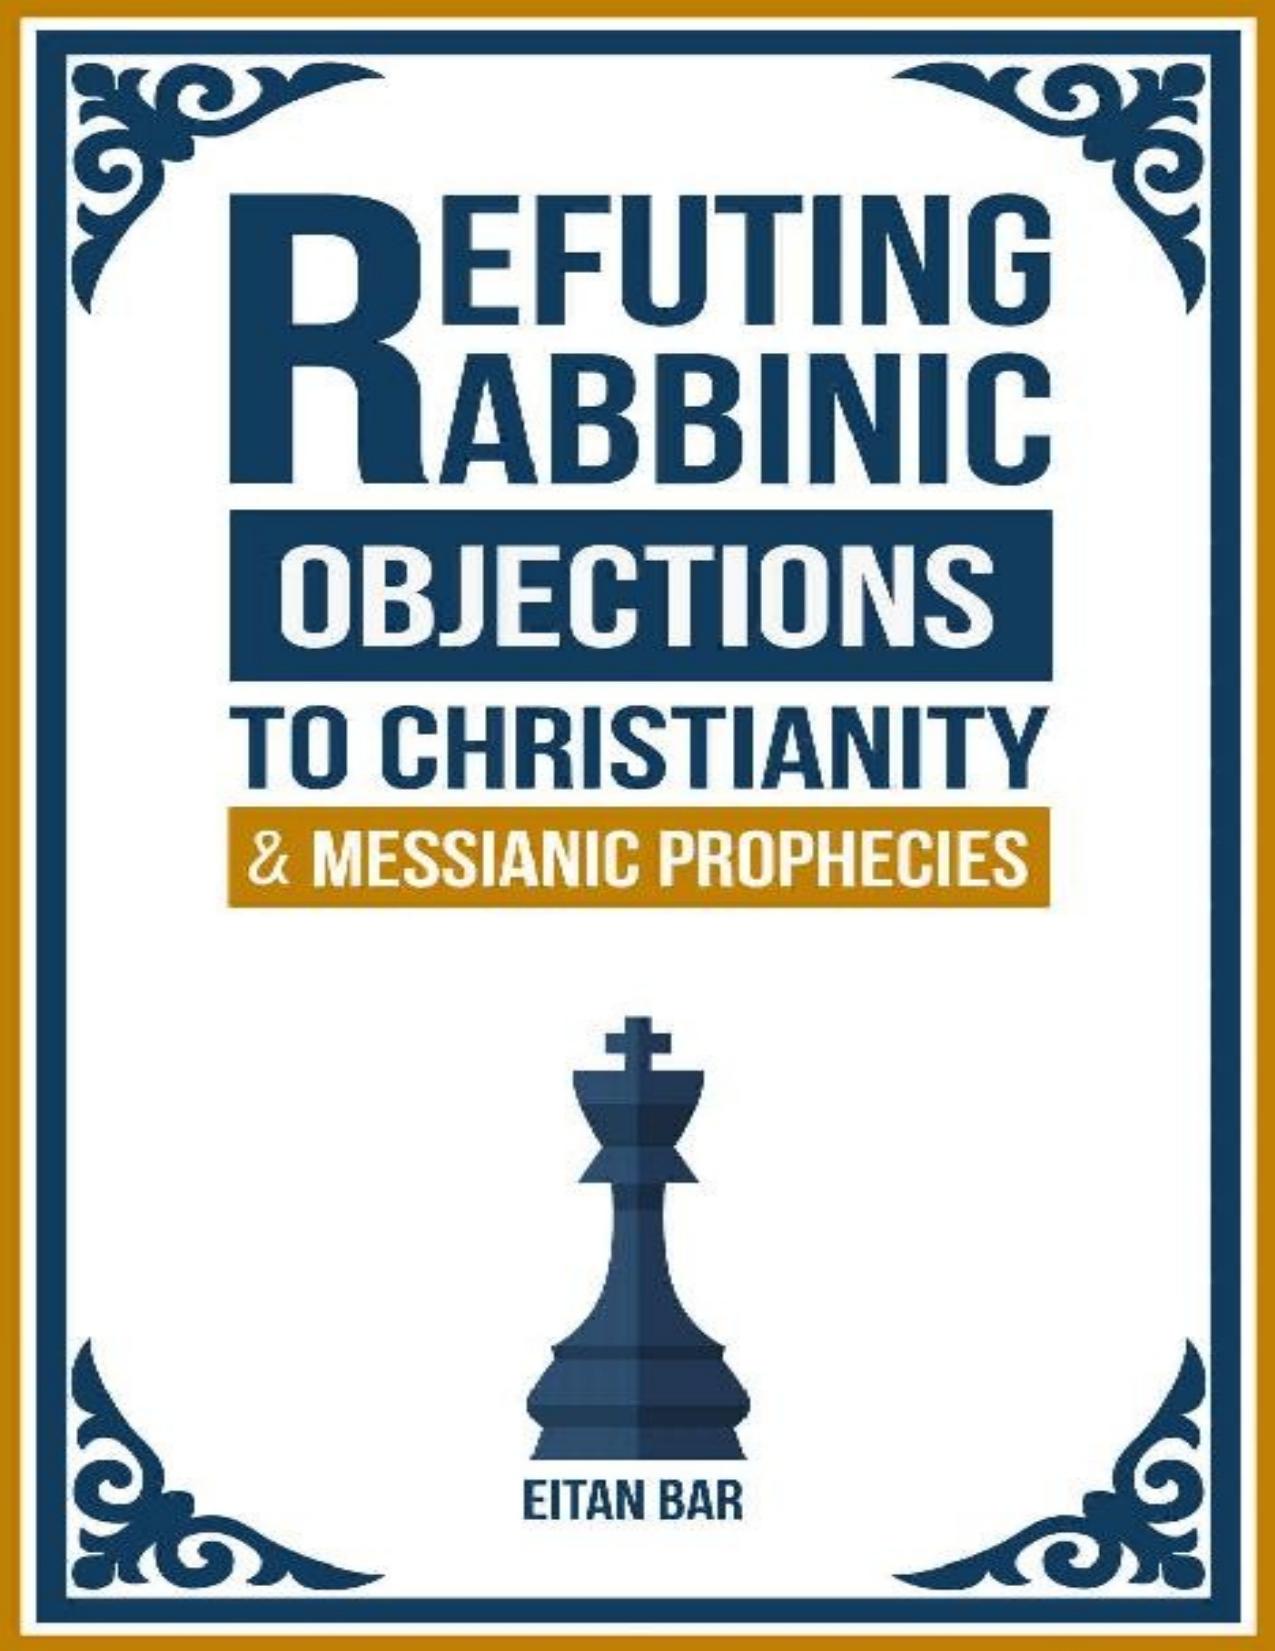 Refuting Rabbinic Objections to Christianity \& Messianic Prophecies - PDFDrive.com